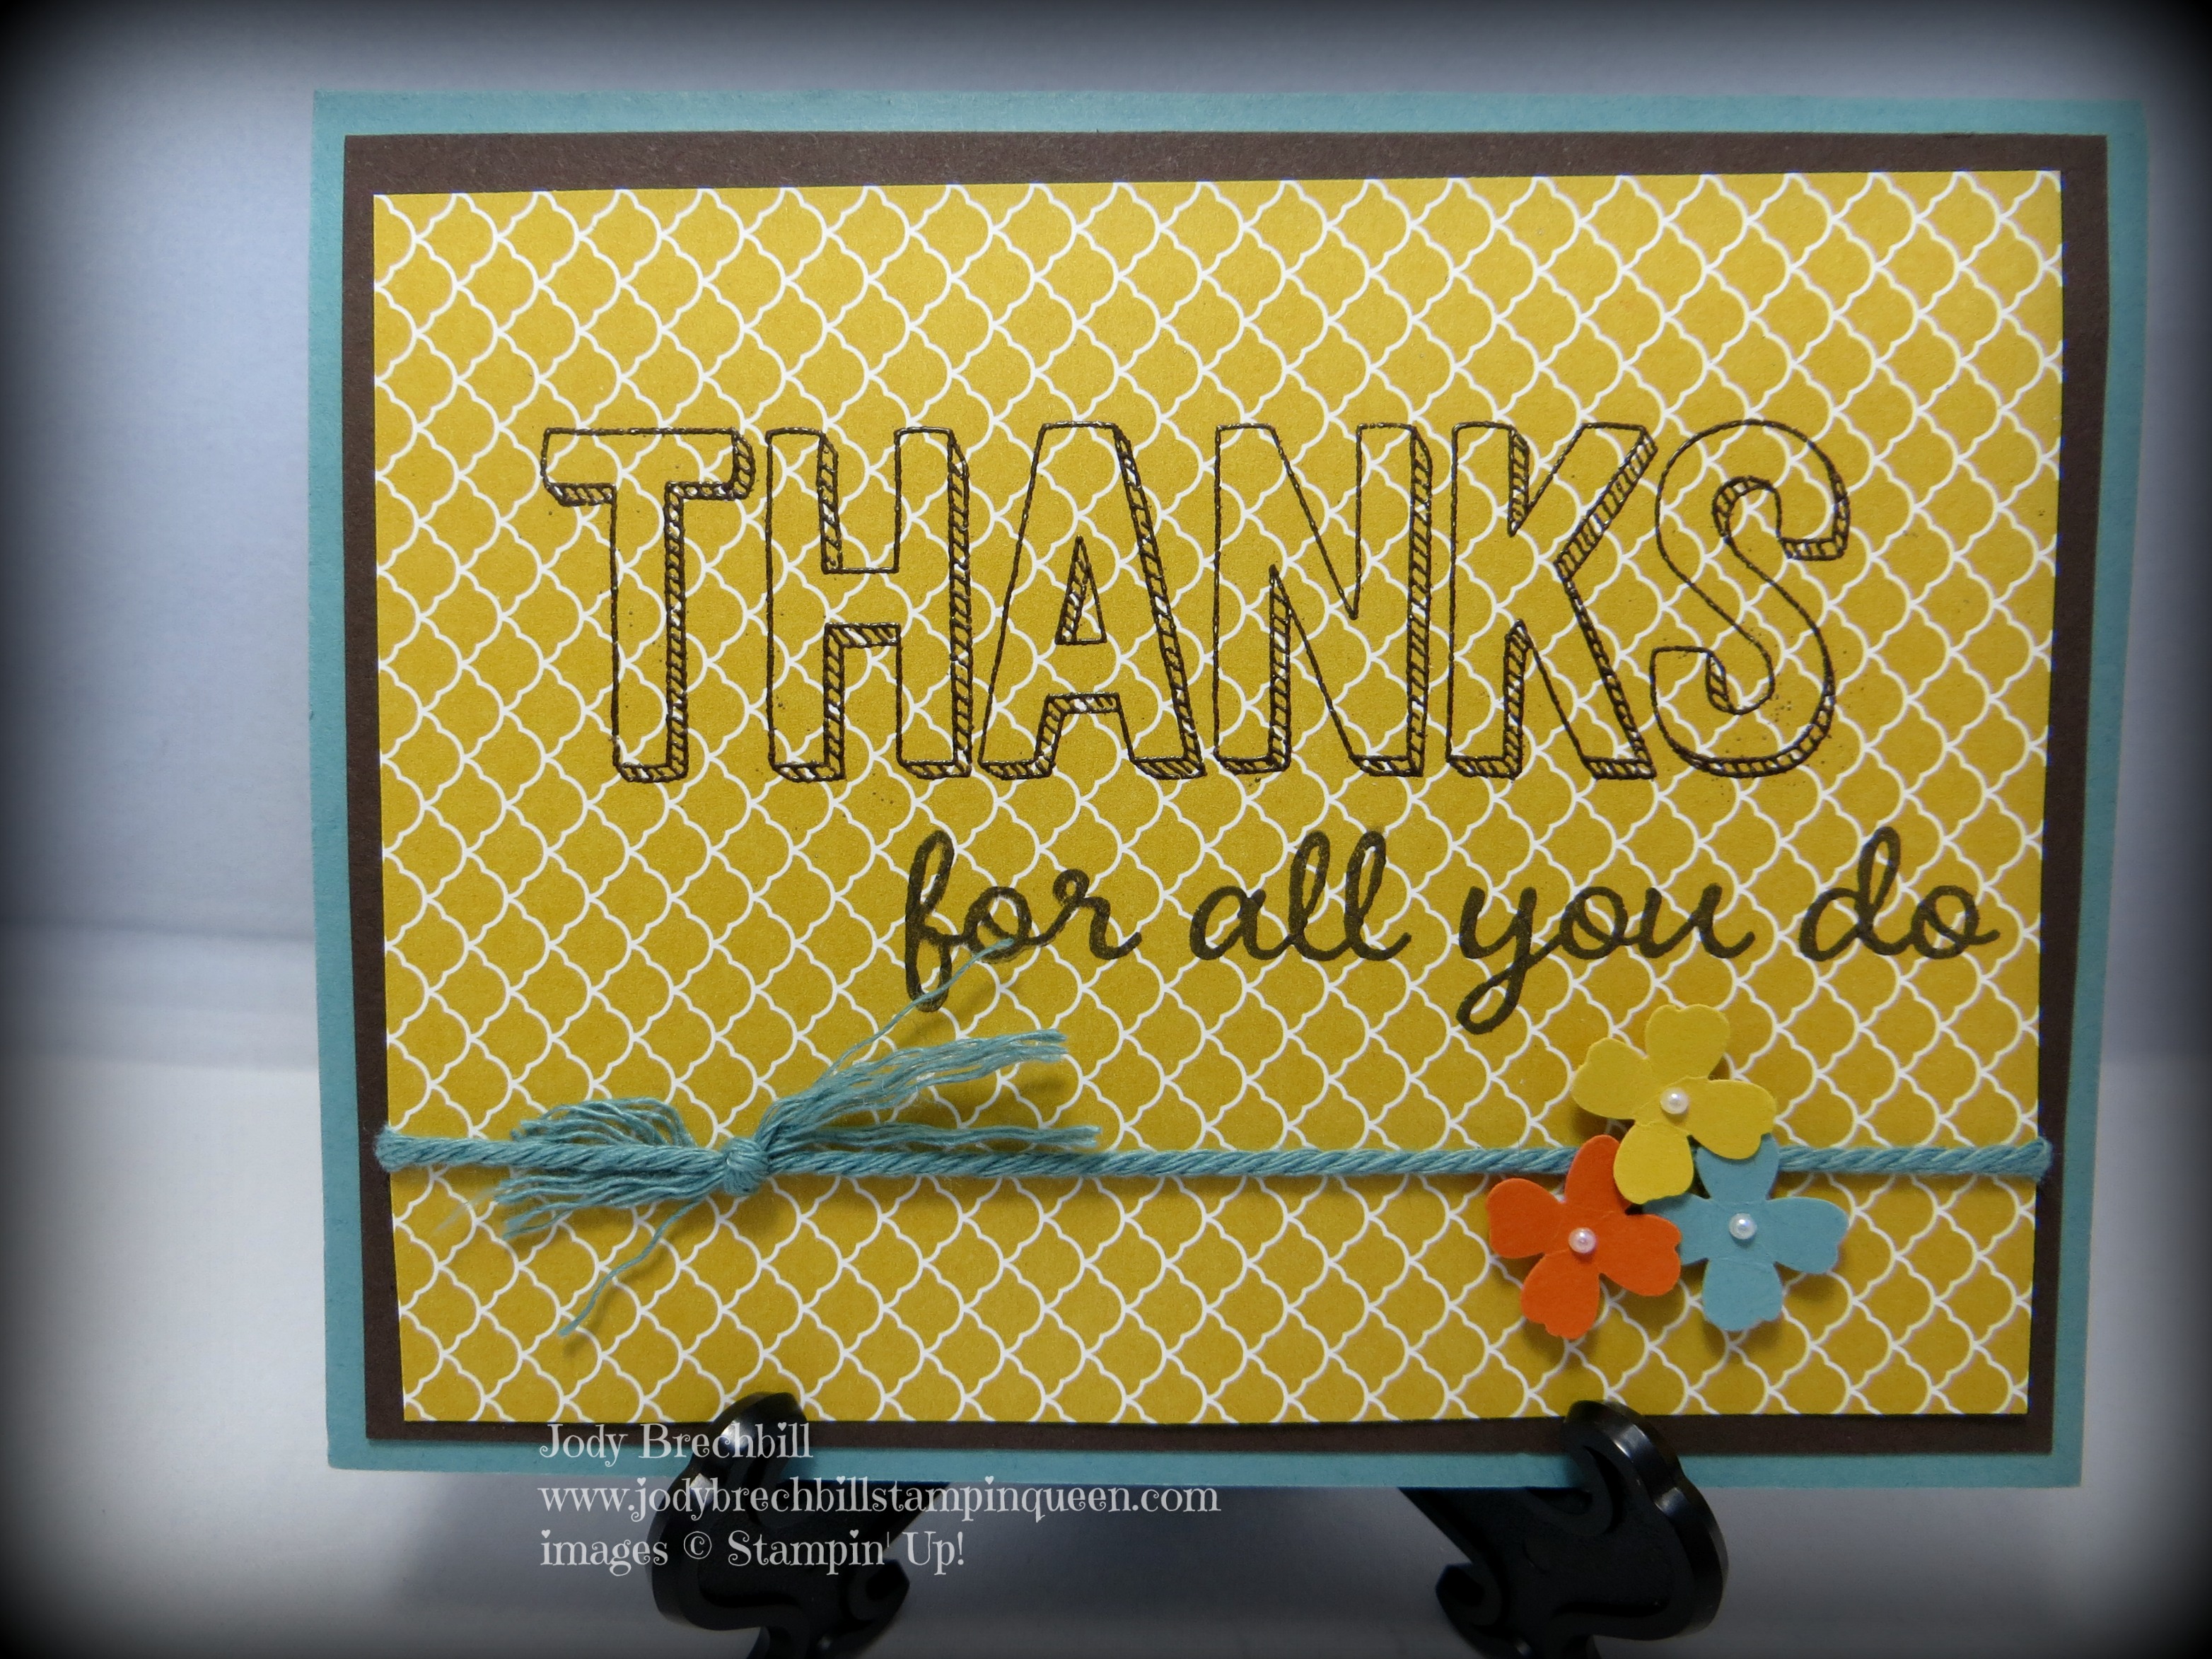 New: Stampin' Up! Envelope Punch Board - DOstamping with Dawn